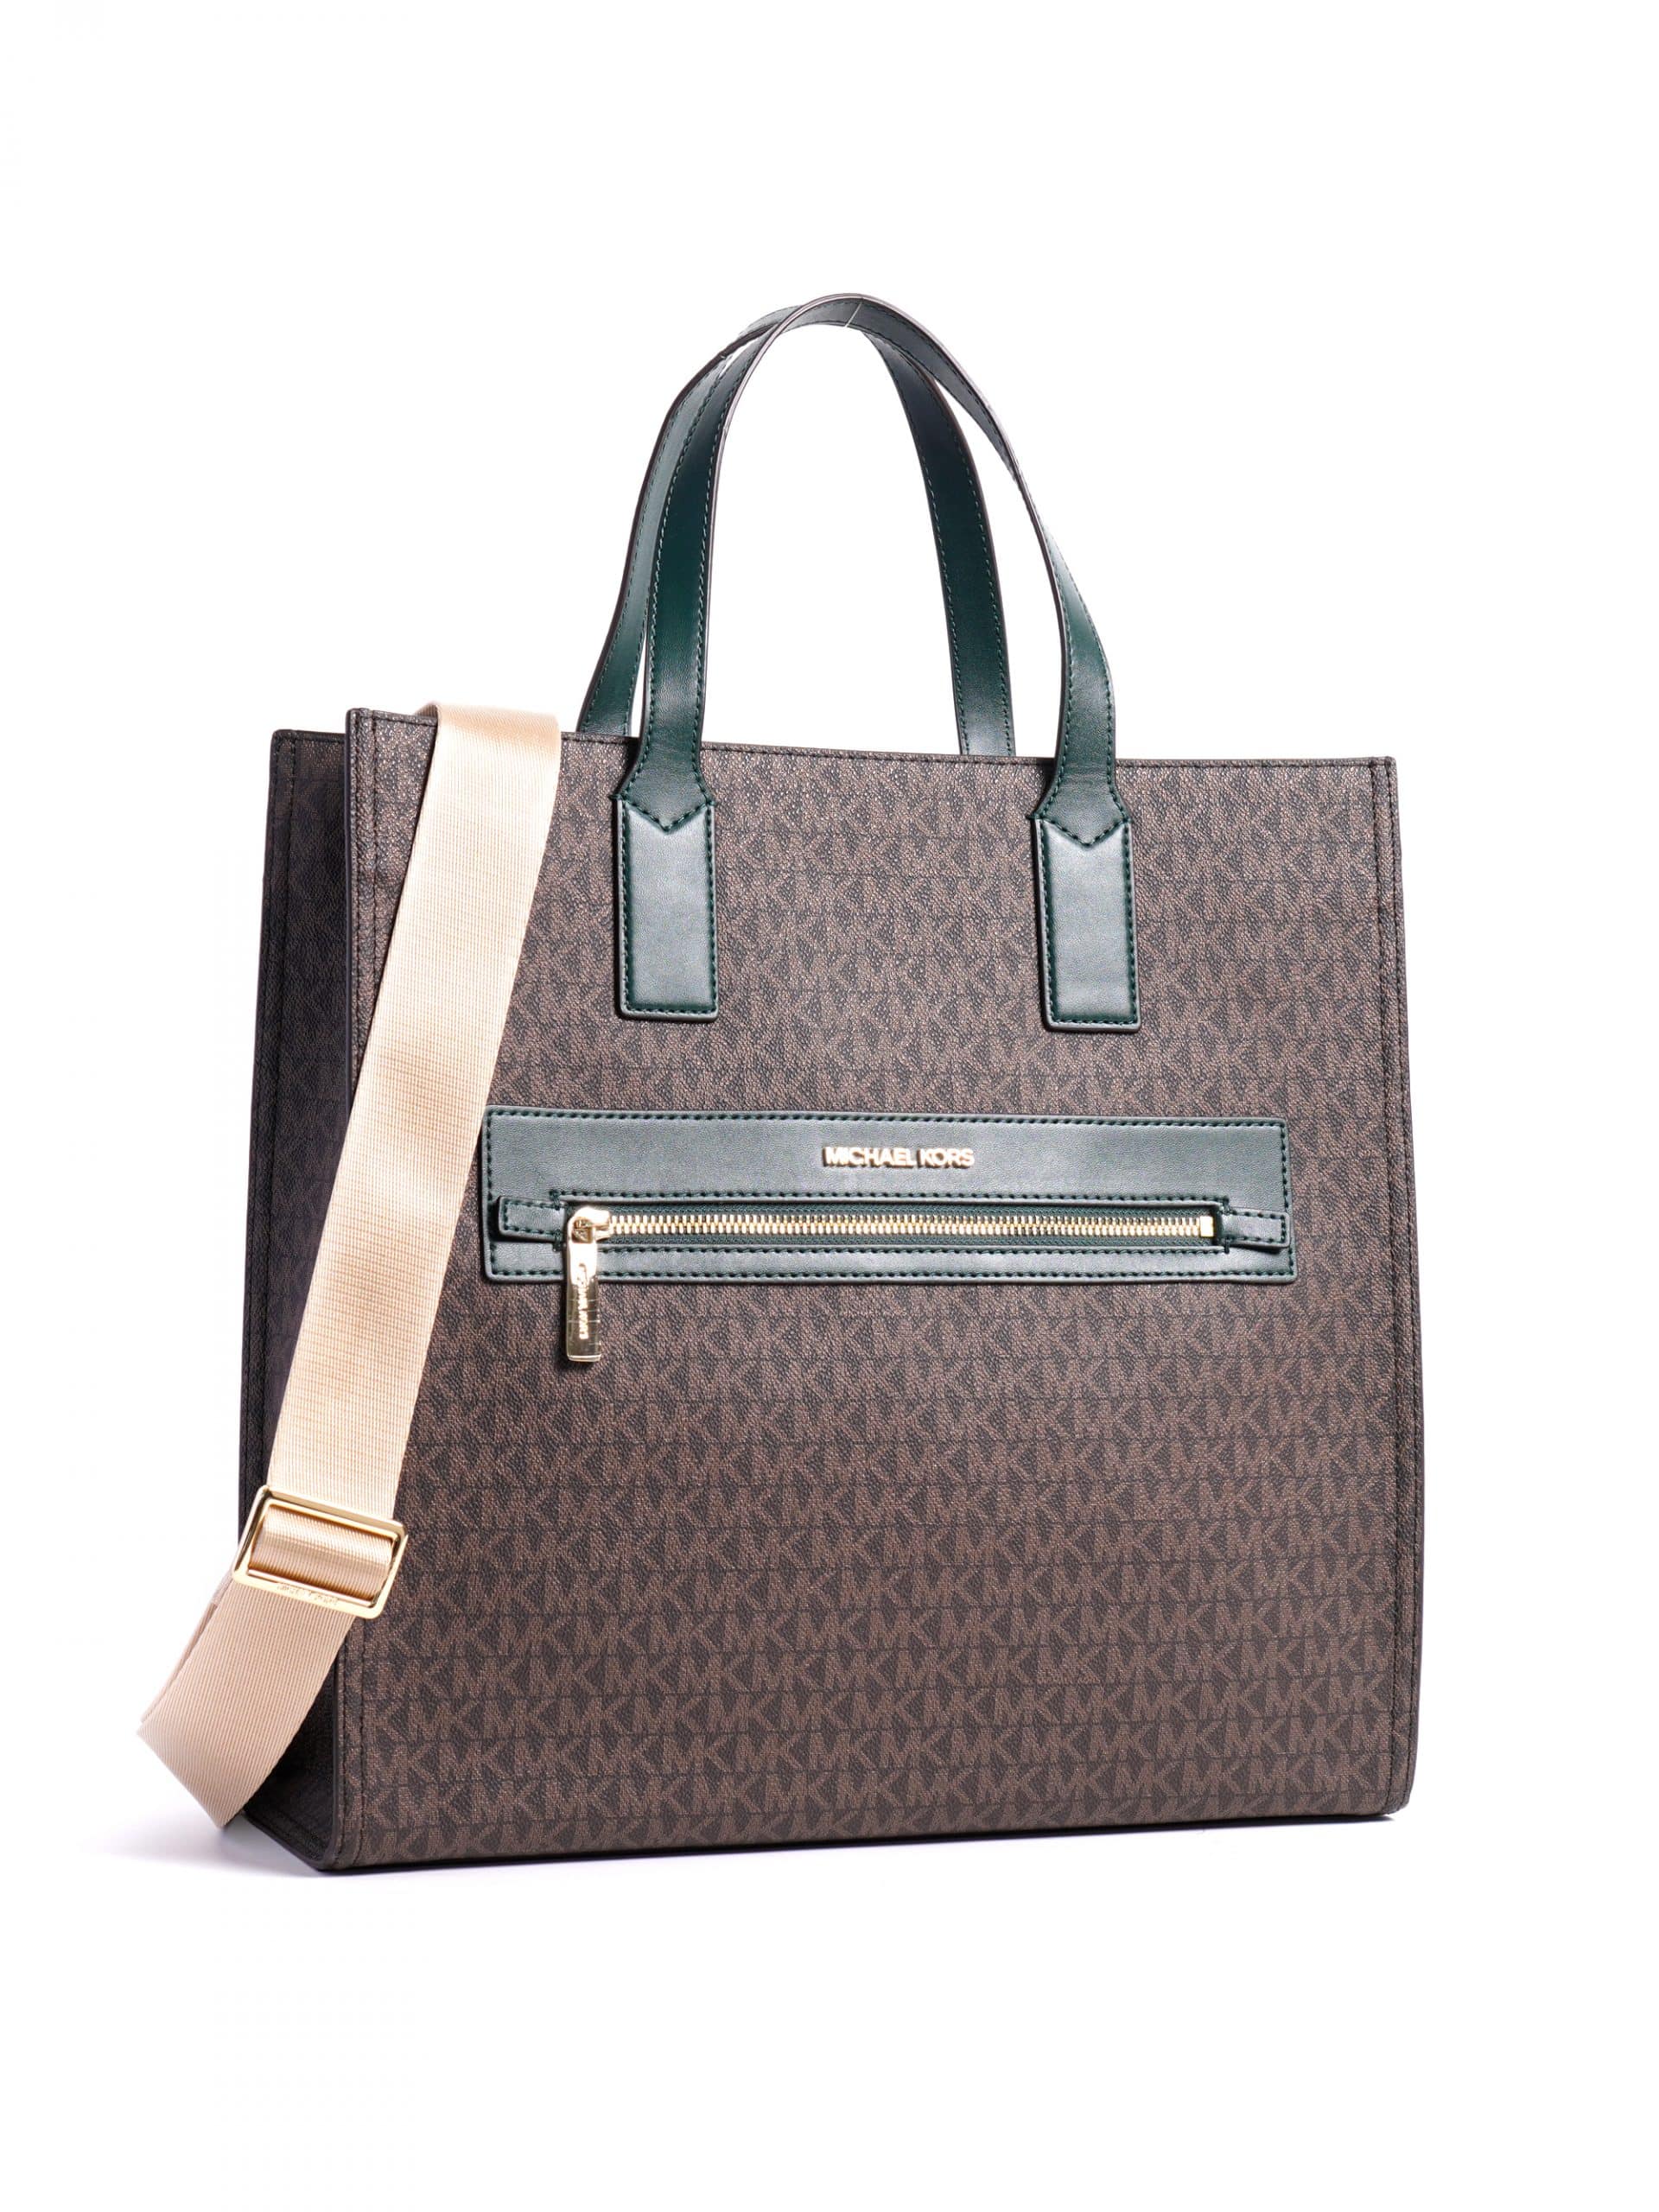 Michael Kors Kenly Large North South Tote Bag in Signature Coated